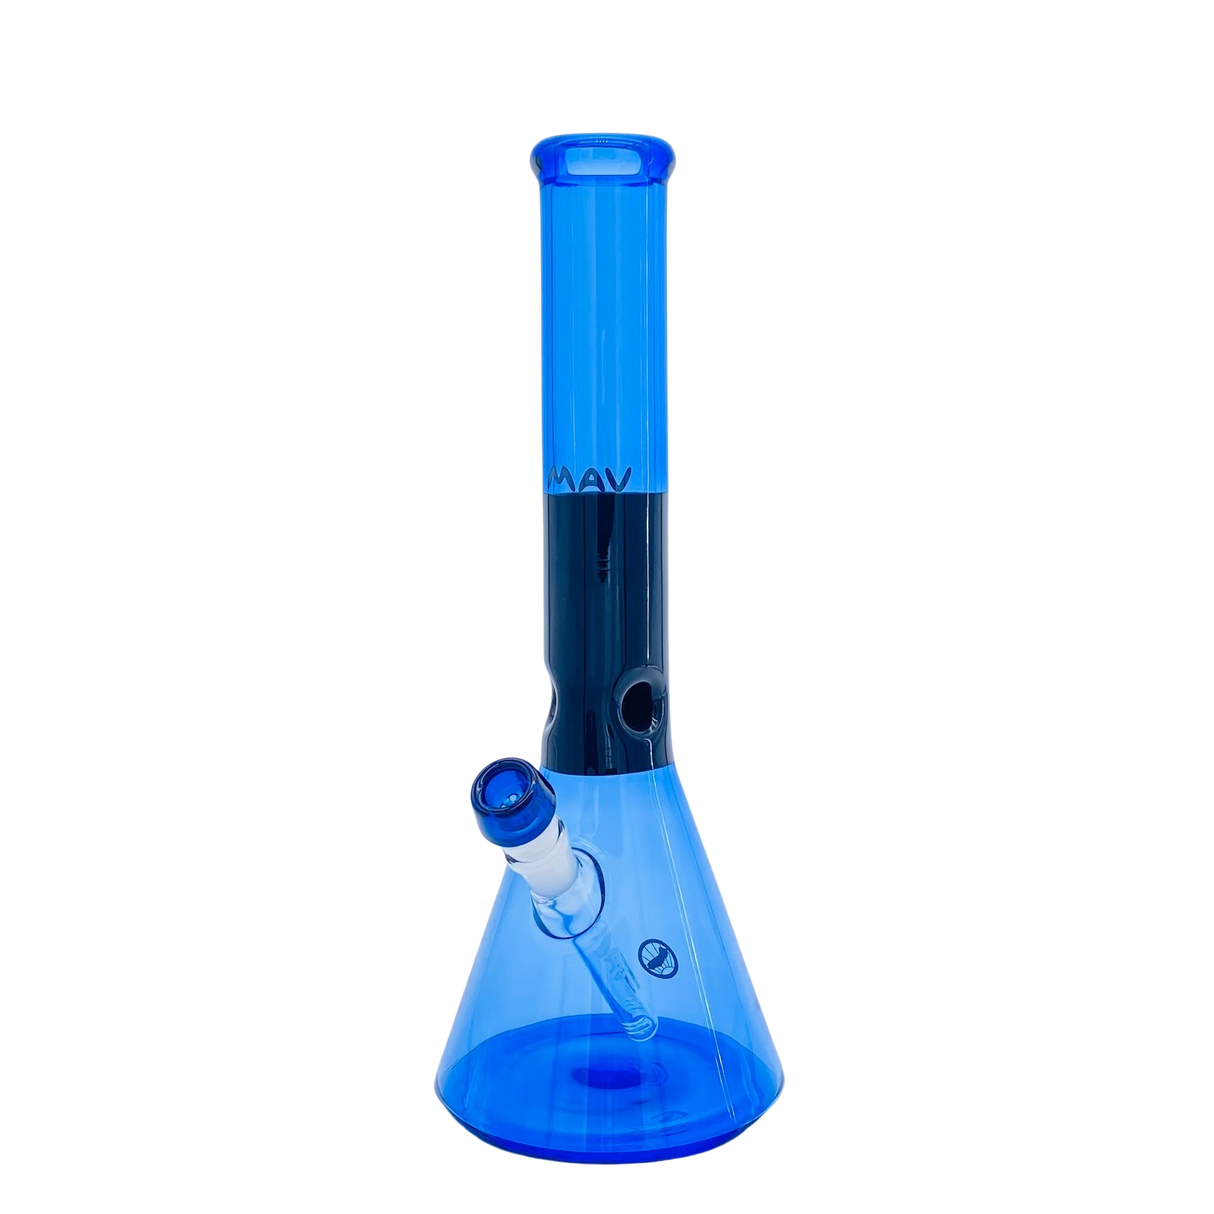 MAV Glass 15" Beaker Bong in Black & Blue with 5mm thickness and clear down stem, front view